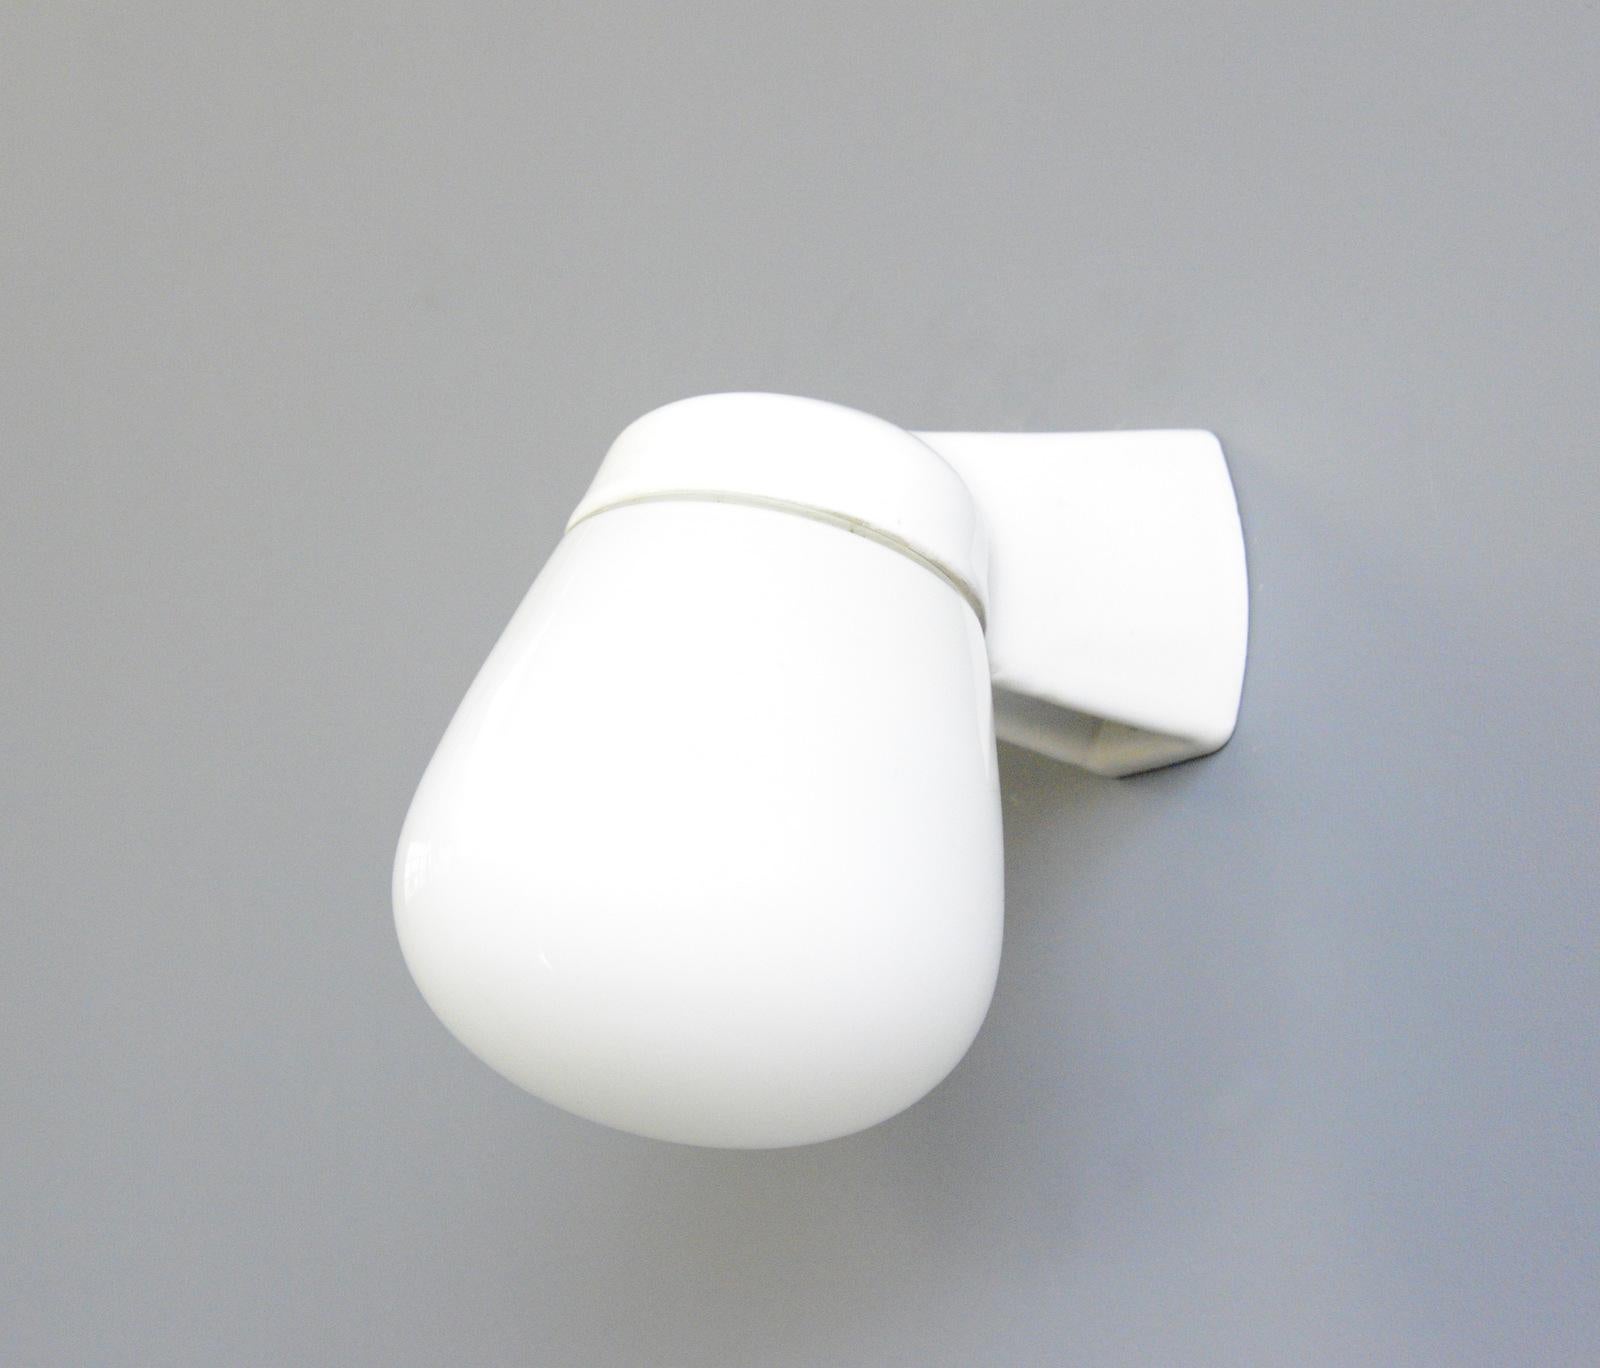 Porcelain Bathroom Lights By Wagenfeld For Lindner Circa 1950s

- Porcelain wall bracket with opaline glass shade
- Takes E27 fitting bulbs
- Wires directly into the wall
- Model 6045
- Produced by Lindner
- Designed by Wilhelm Wagenfeld
-